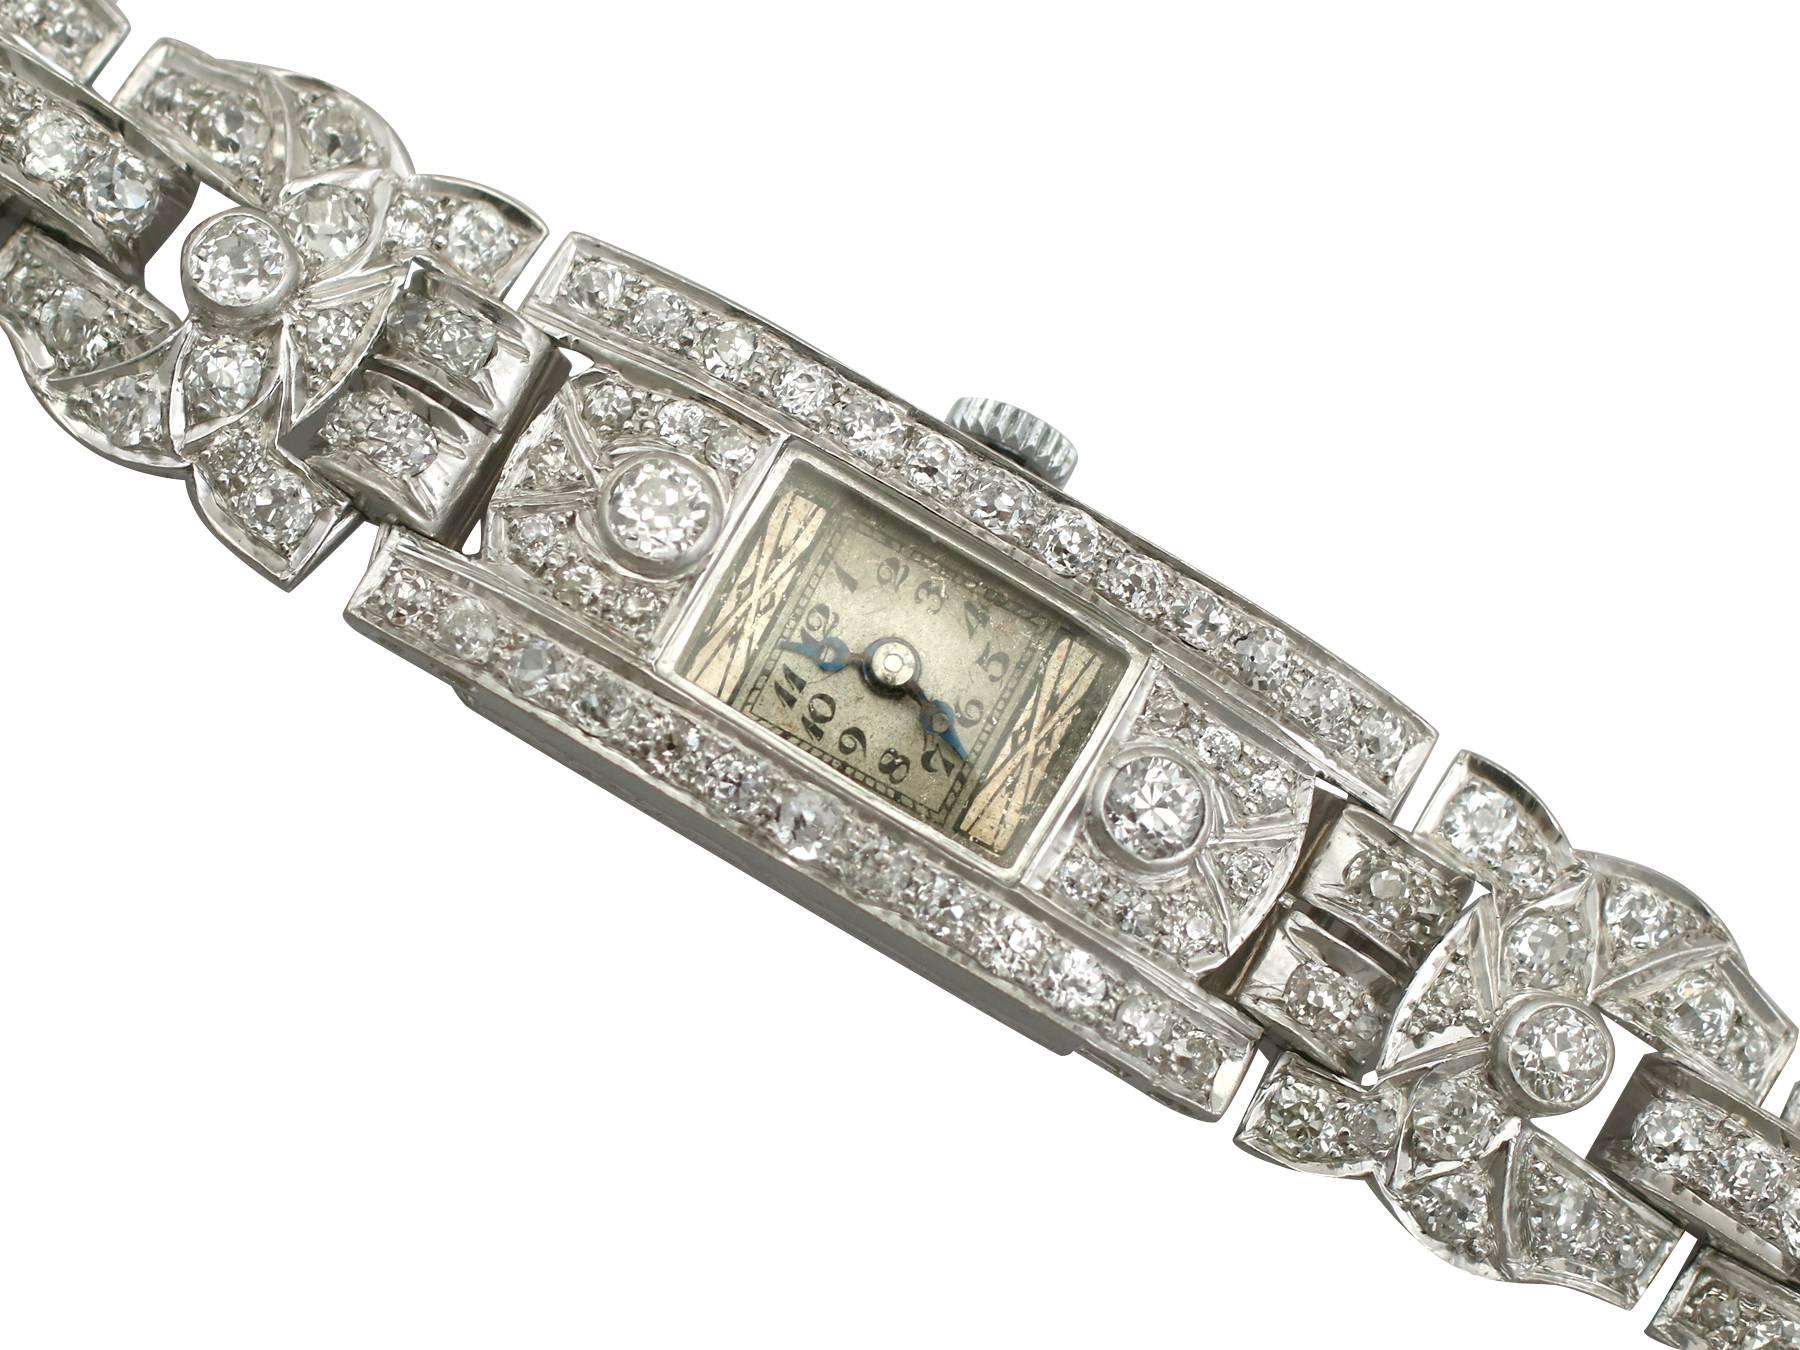 A stunning 6.96 carat diamond and platinum cocktail watch by 'Bucherer'; part of our diverse antique jewellery and estate jewelry collections.

This stunning, fine and impressive Bucherer ladies watch has been crafted in platinum.

This ladies